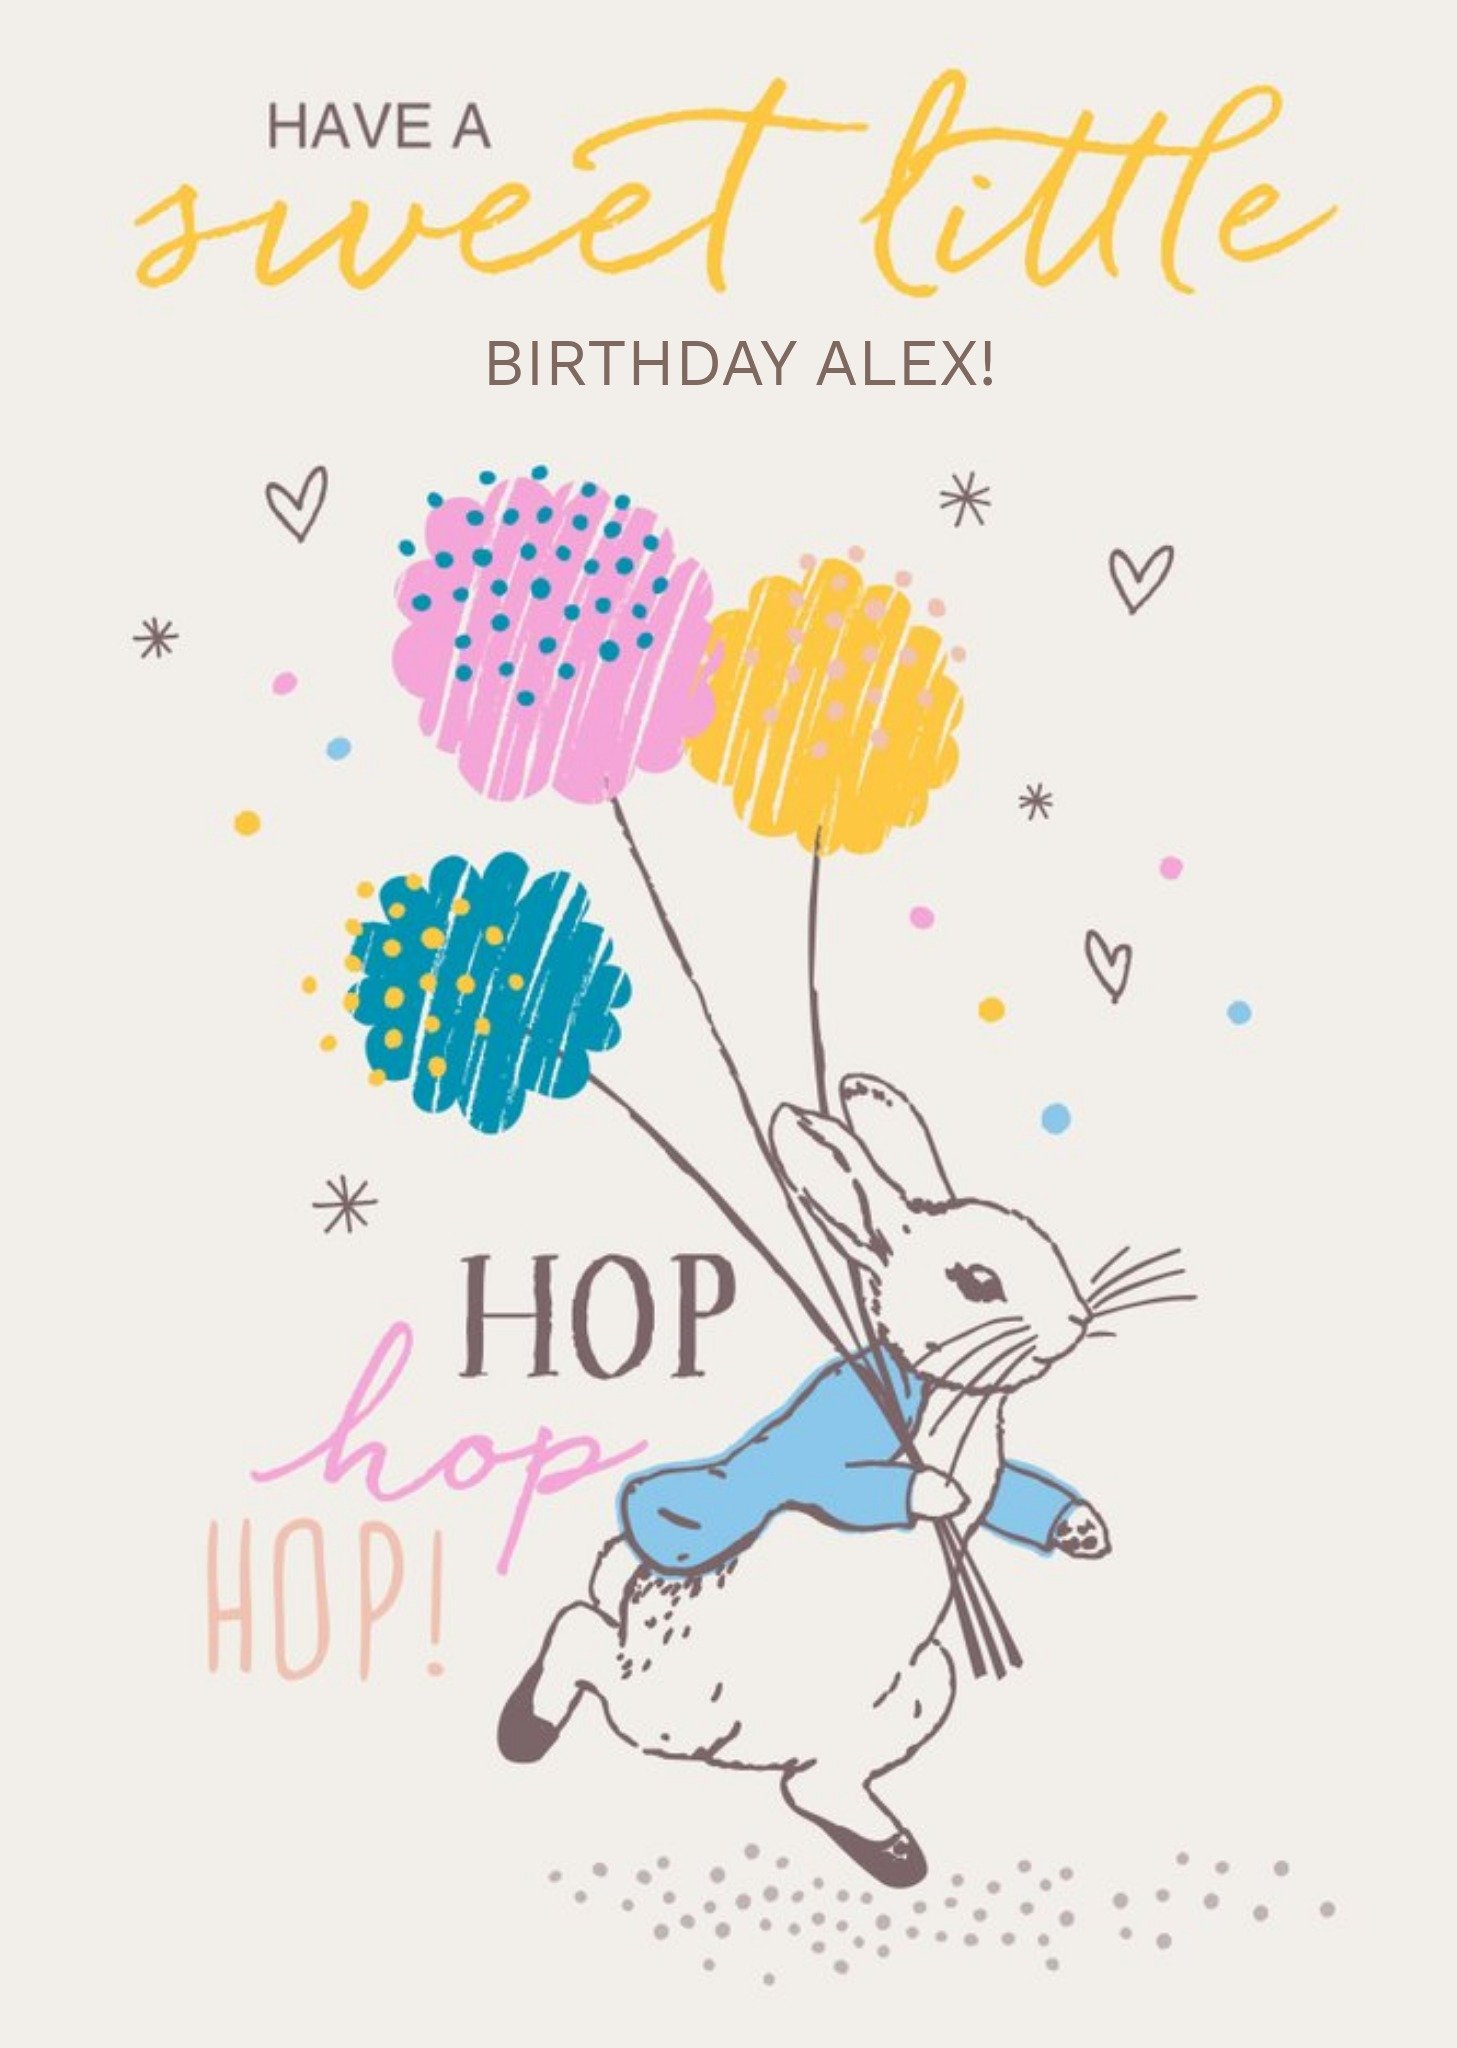 Peter Rabbit Sweet Little Birthday Personalised Text Card, Large